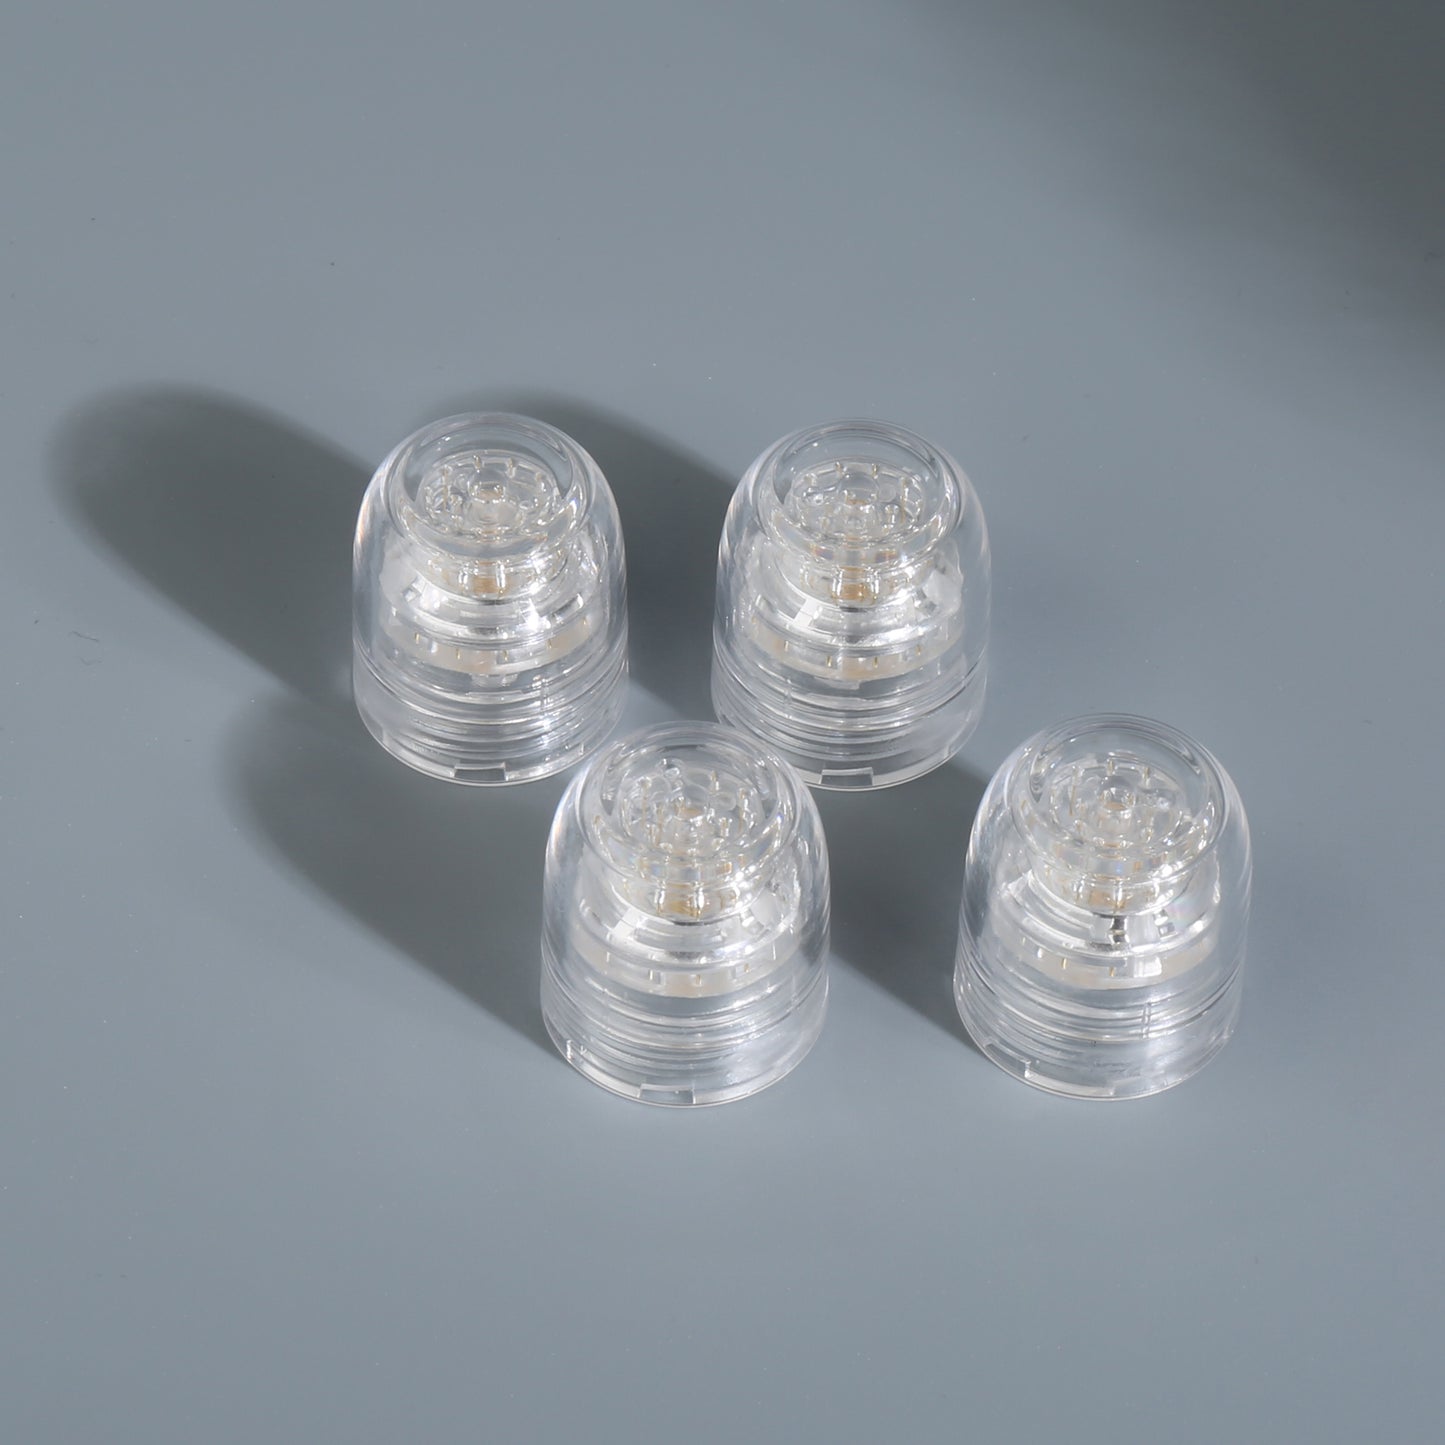 Sterile Disposable 0.5mm Needle Heads